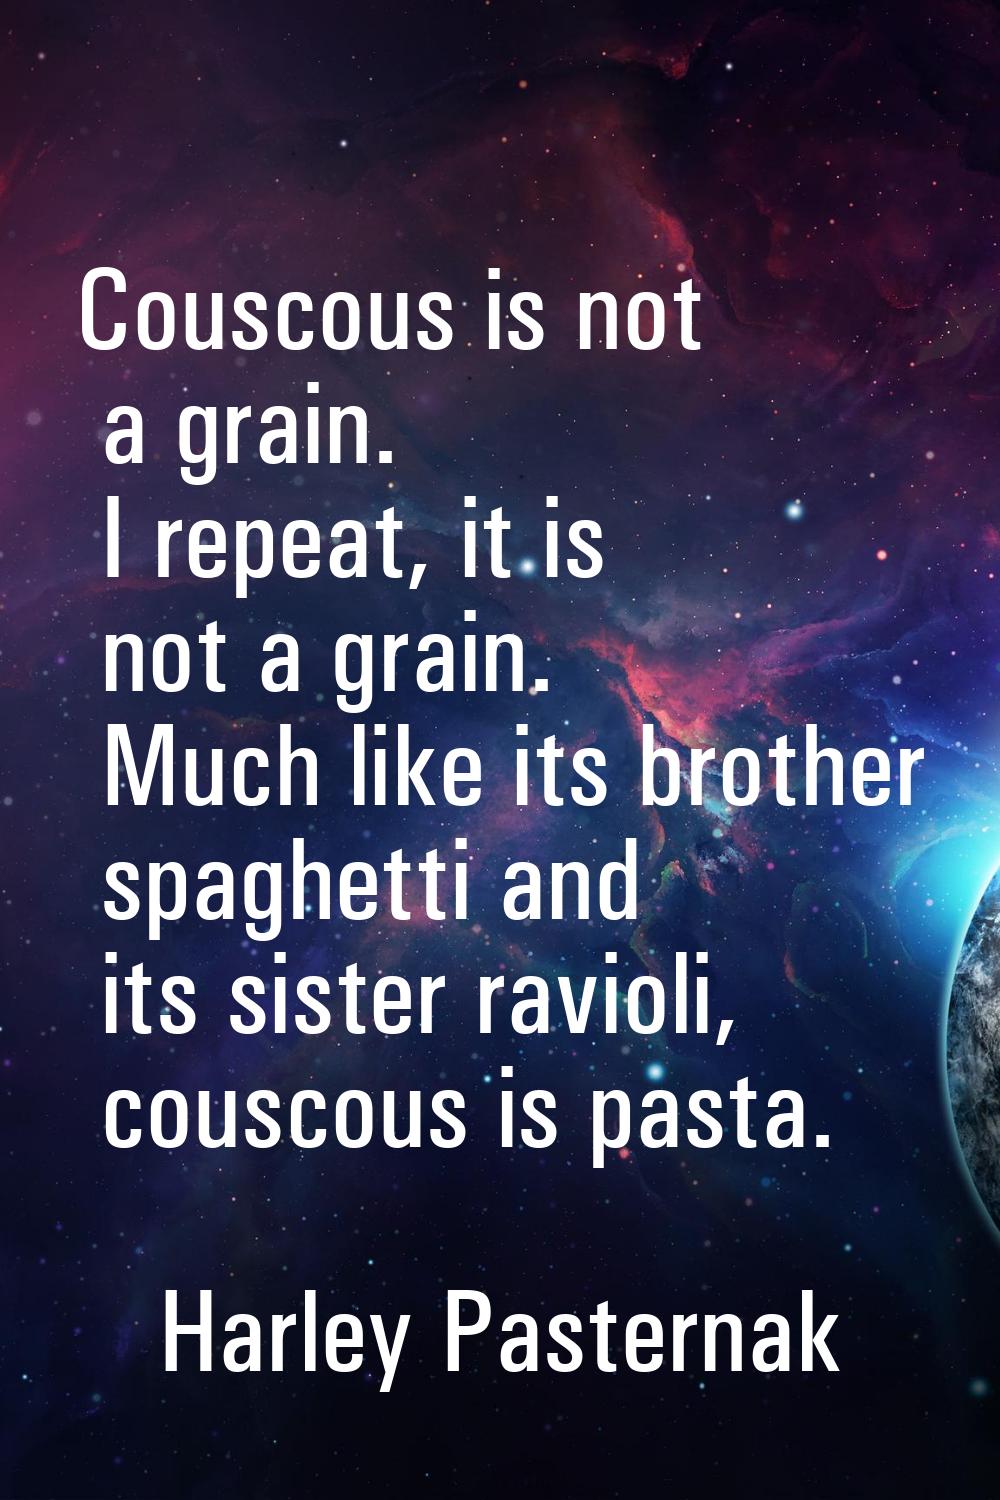 Couscous is not a grain. I repeat, it is not a grain. Much like its brother spaghetti and its siste